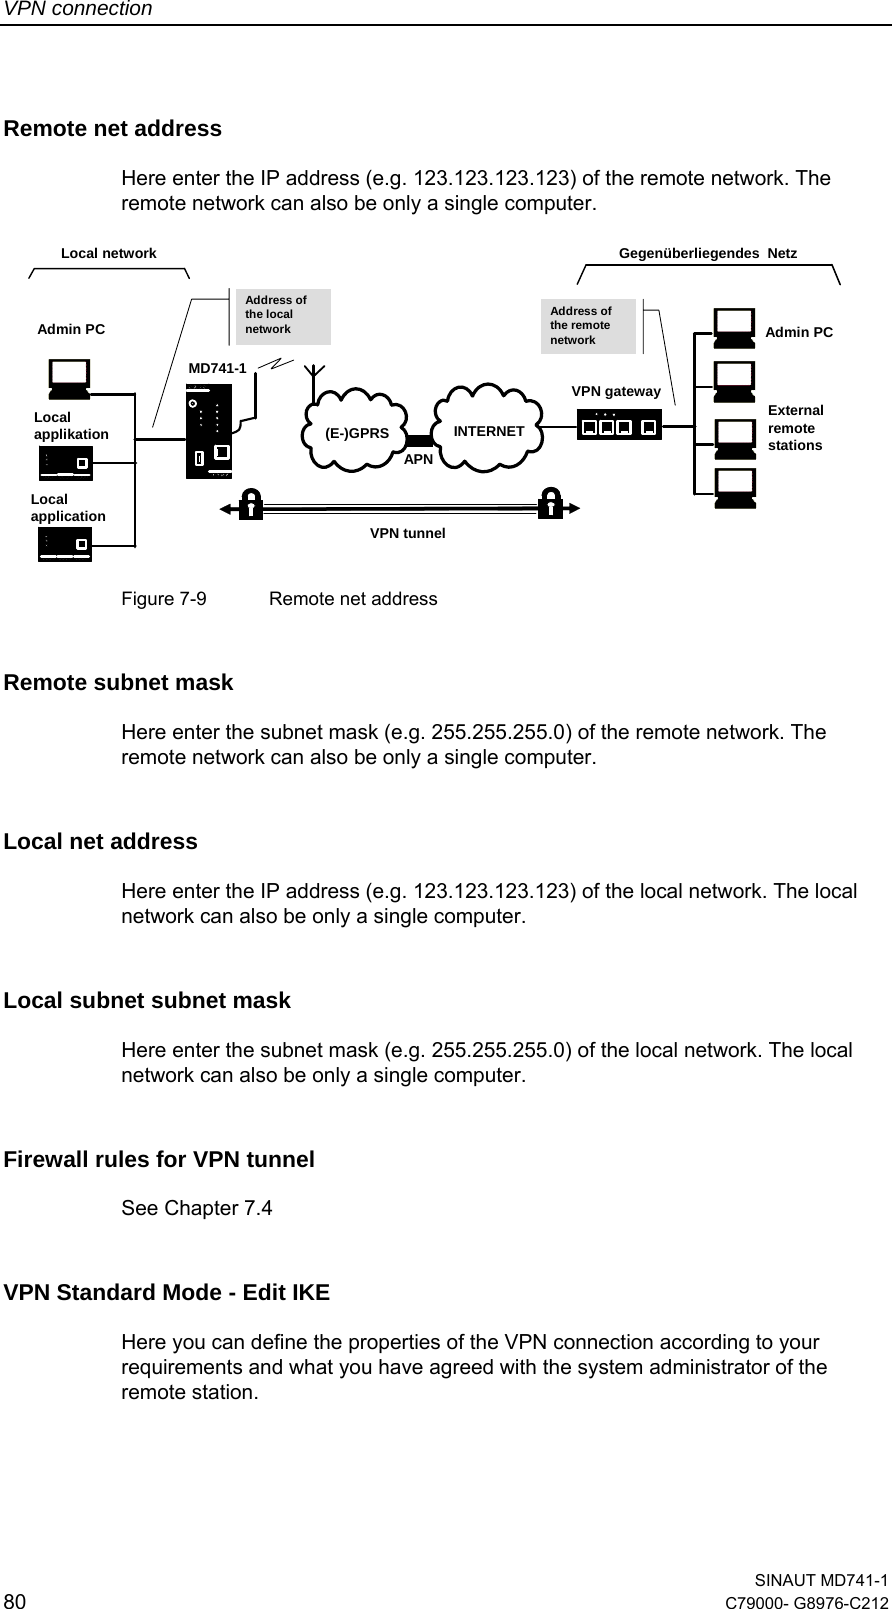 VPN connection  SINAUT MD741-1 80  C79000- G8976-C212   Remote net address Here enter the IP address (e.g. 123.123.123.123) of the remote network. The remote network can also be only a single computer.  APN(E-)GPRS INTERNETMD741-1VPN gatewayLocal network Gegenüberliegendes  NetzLocalapplicationAdmin PCLocalapplikationAdmin PCExternalremotestationsVPN tunnelAddress of the remotenetworkAddress of the localnetwork Figure 7-9  Remote net address Remote subnet mask Here enter the subnet mask (e.g. 255.255.255.0) of the remote network. The remote network can also be only a single computer. Local net address Here enter the IP address (e.g. 123.123.123.123) of the local network. The local network can also be only a single computer. Local subnet subnet mask Here enter the subnet mask (e.g. 255.255.255.0) of the local network. The local network can also be only a single computer. Firewall rules for VPN tunnel See Chapter 7.4 VPN Standard Mode - Edit IKE Here you can define the properties of the VPN connection according to your requirements and what you have agreed with the system administrator of the remote station.  